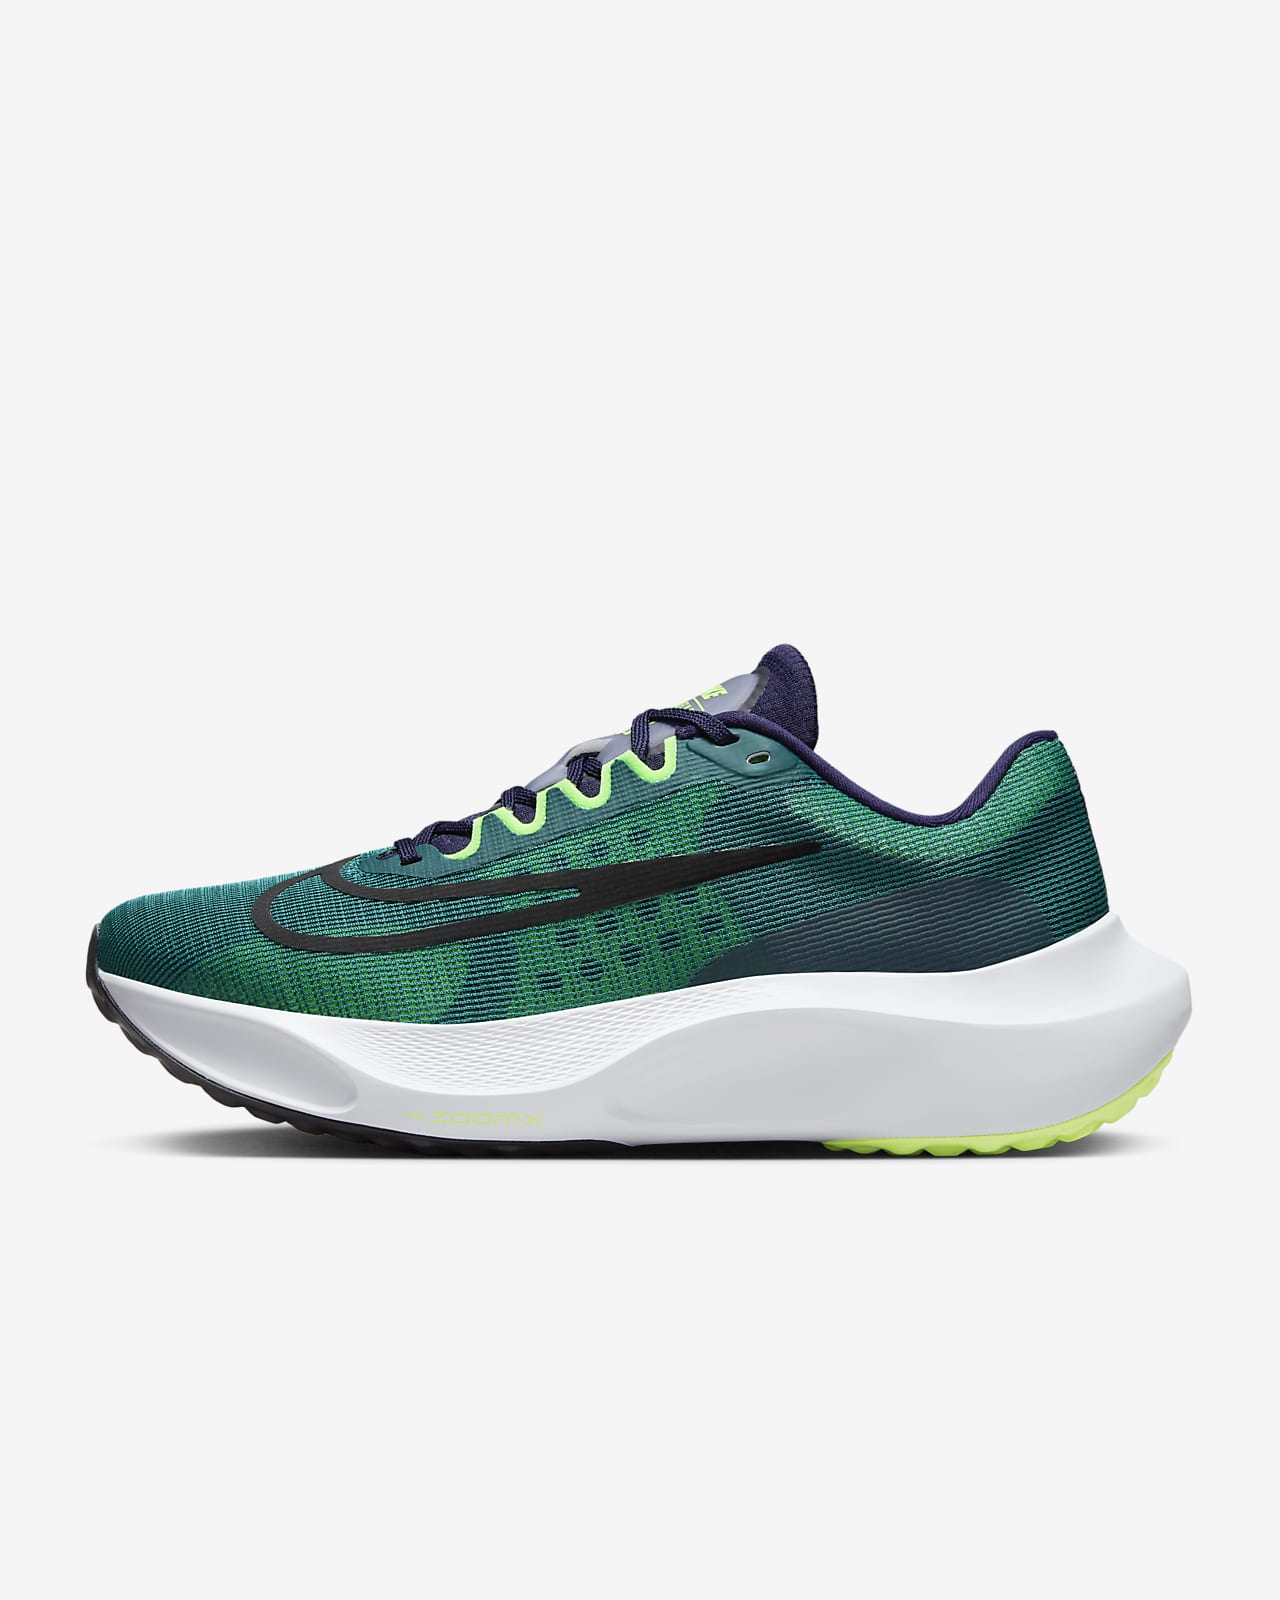 nike zoom running shoes mens